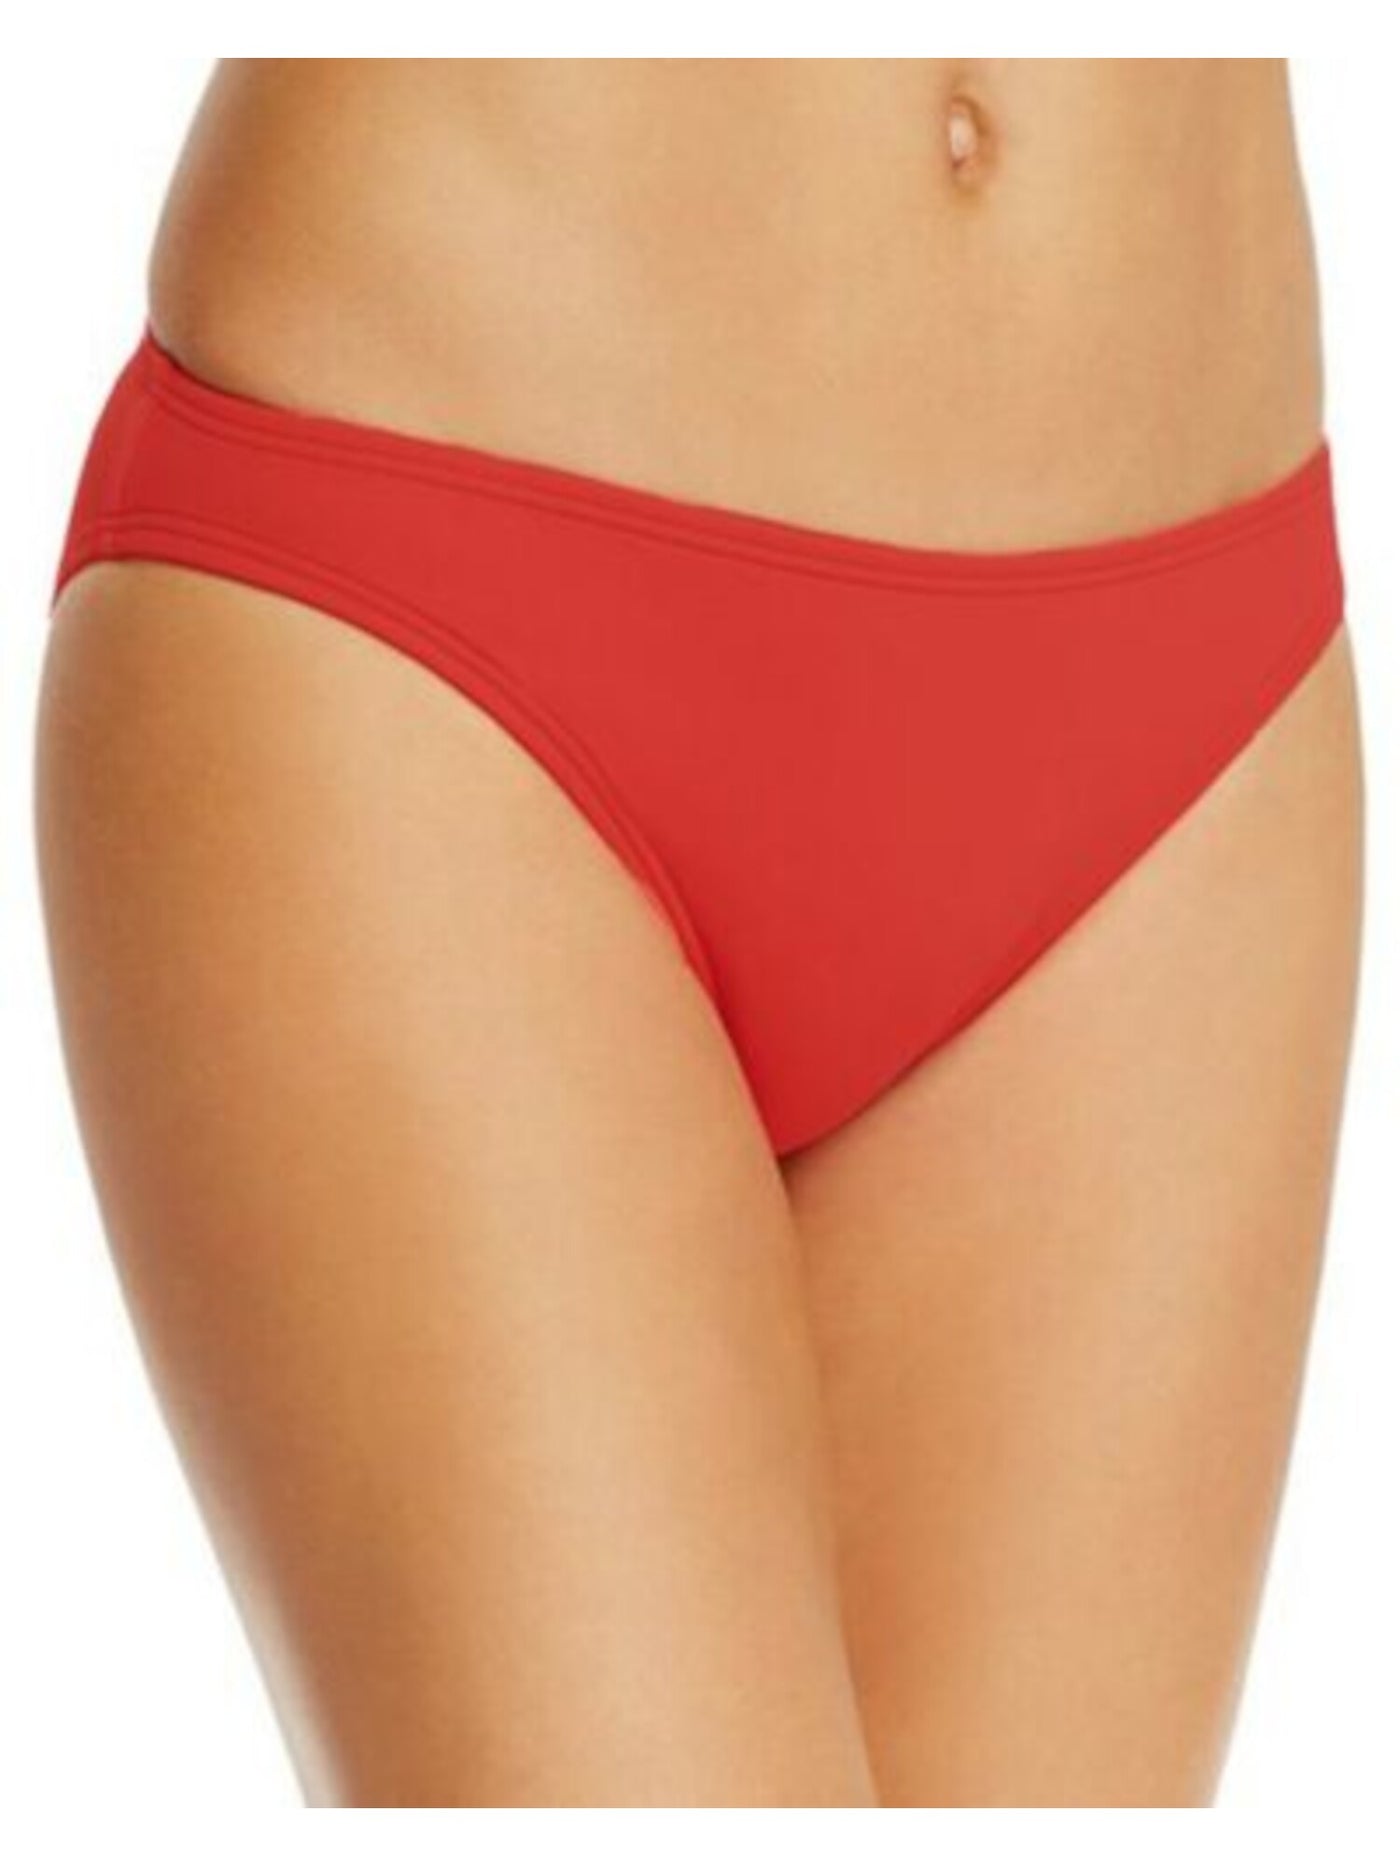 DKNY Women's Red Stretch Lined Bikini Full Coverage UV Protection Hipster Swimsuit Bottom XS